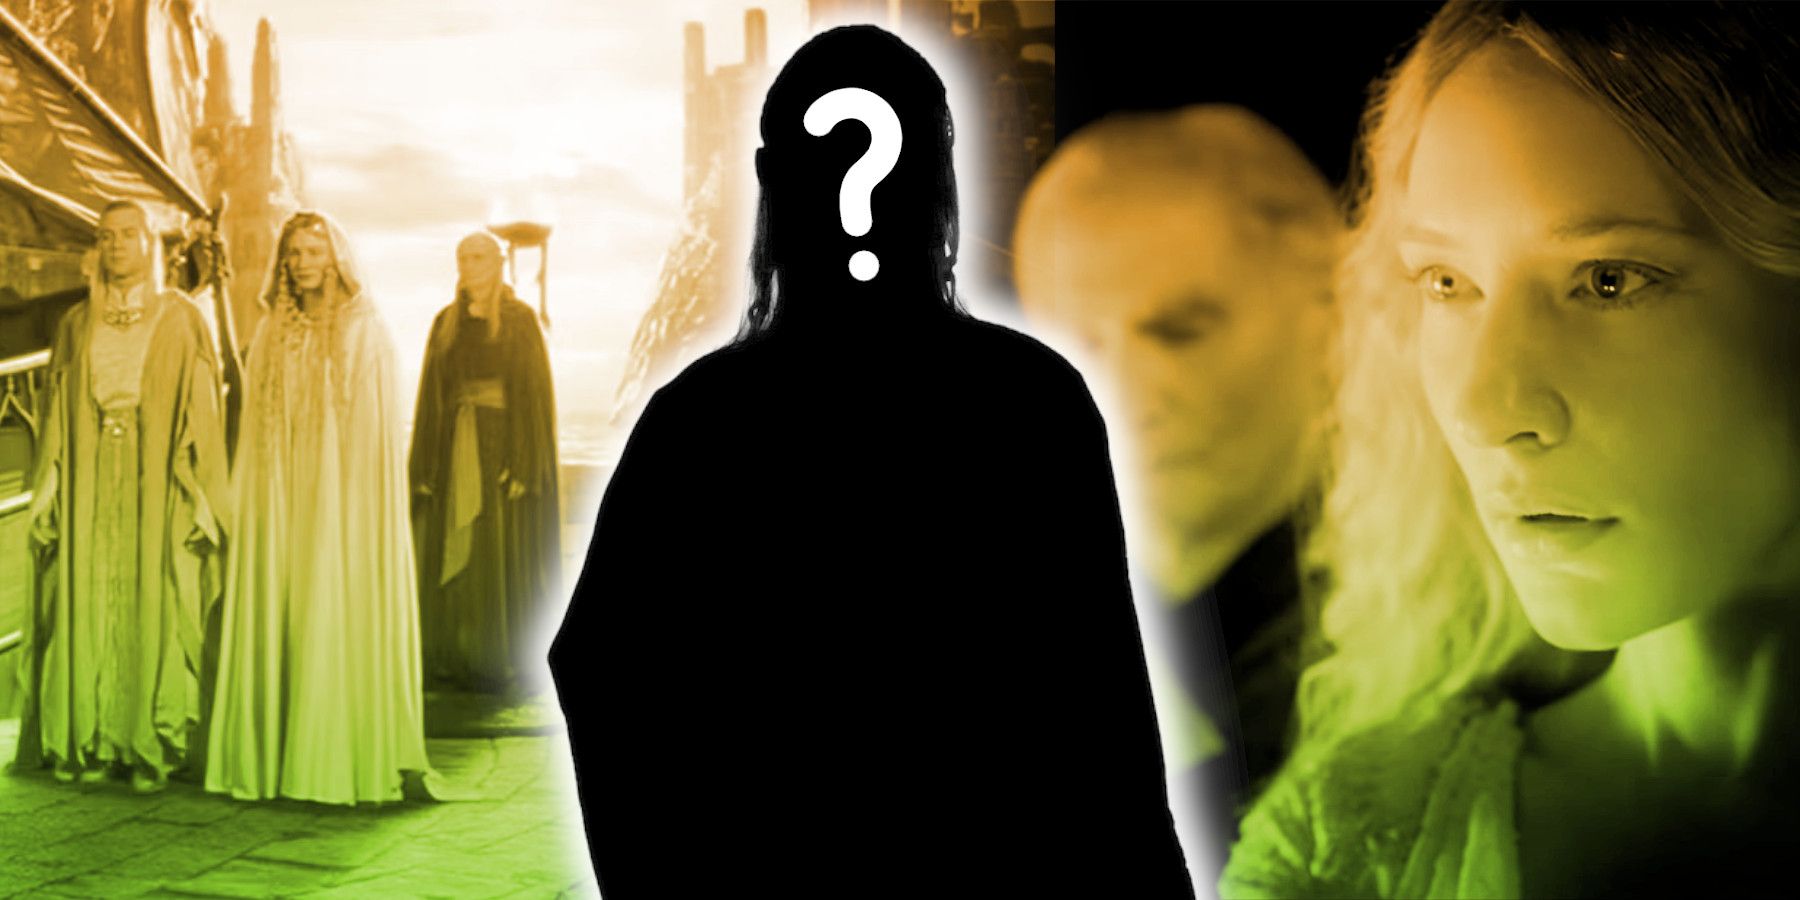 A silhouette with a question mark on it in front of Elves from The Lord of the Rings